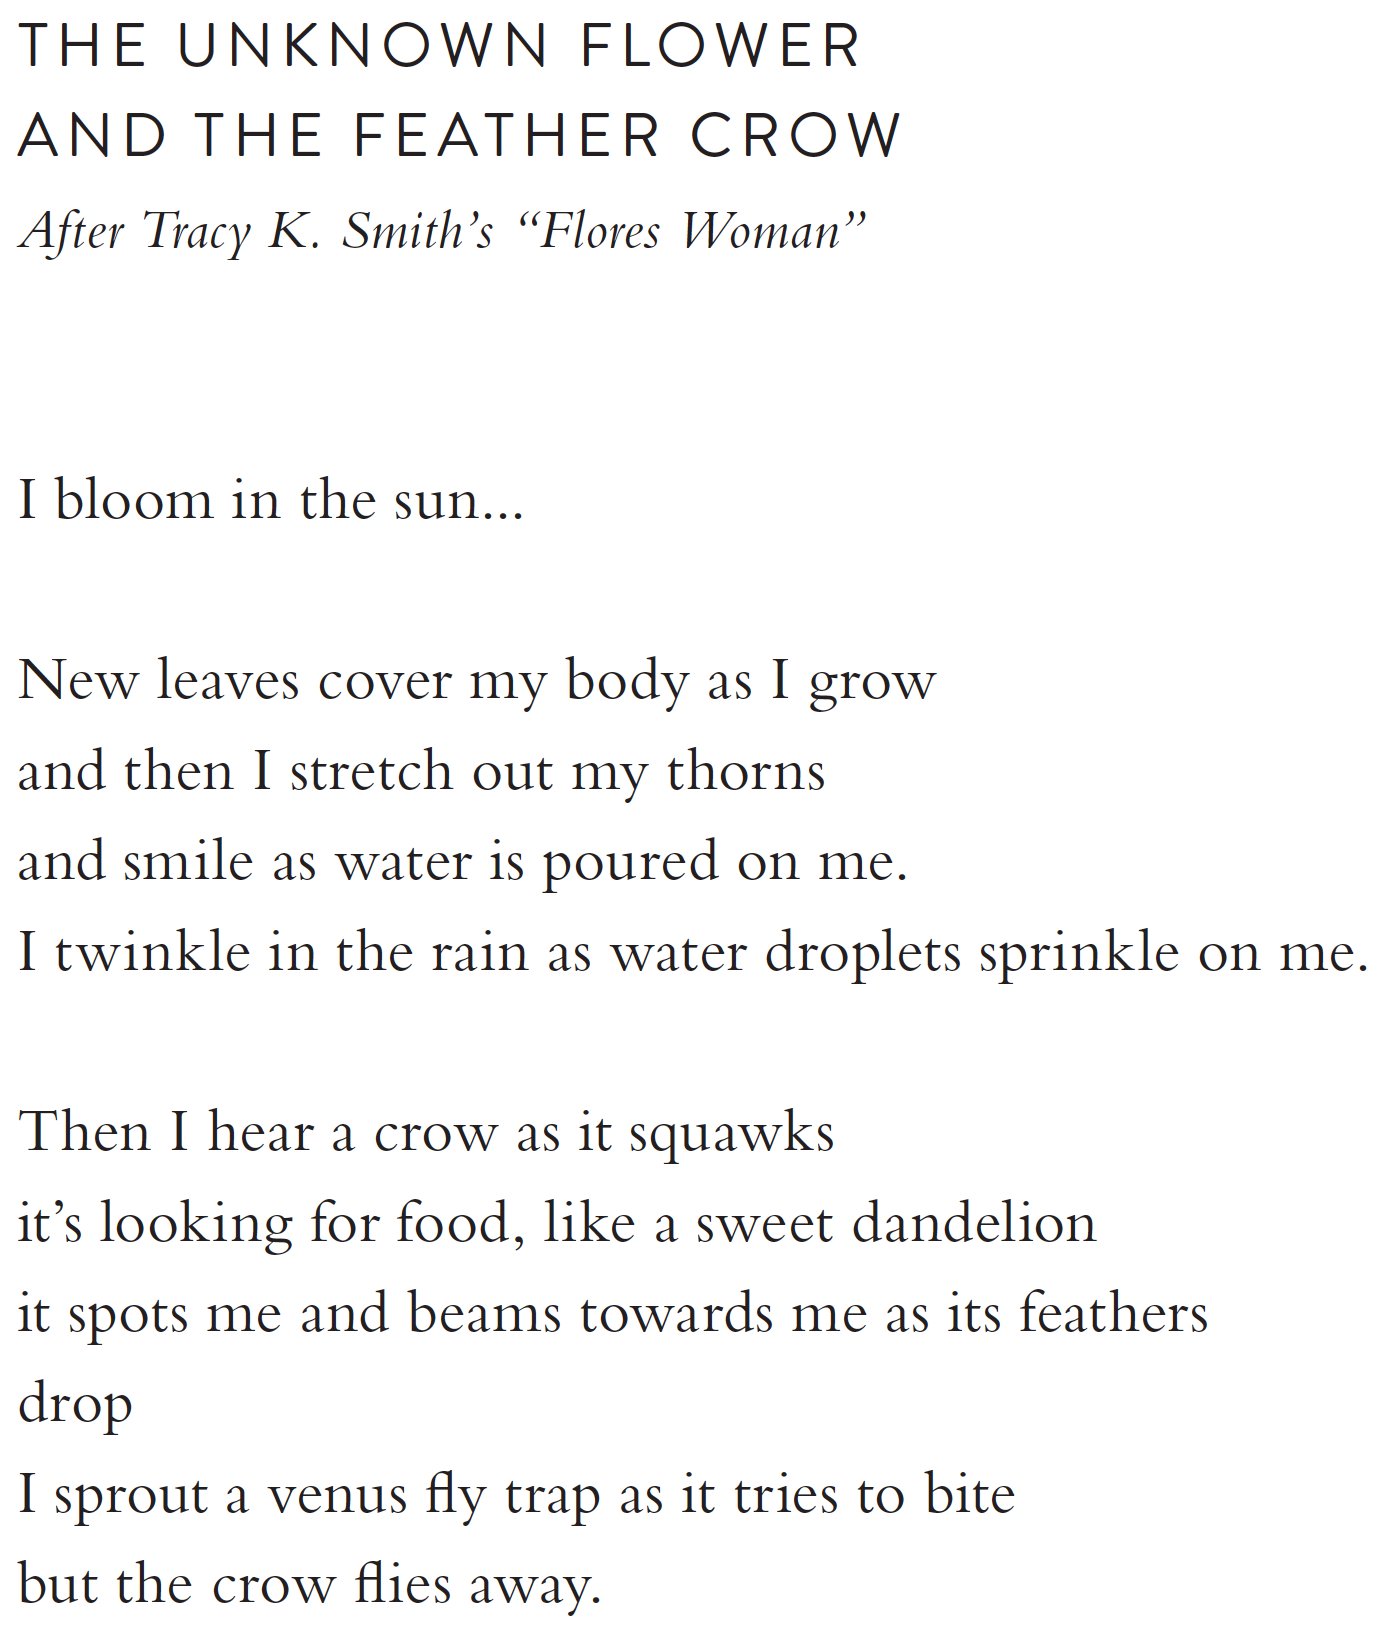 The Unknown Flower  and the Feather Crow  After Tracy K. Smith’s “Flores Woman”  I bloom in the sun...  New leaves cover my body as I grow and then I stretch out my thorns then I smile as water is poured on me. I twinkle in the rain as water droplets sprinkle on me.  Then I hear a crow as it squawks it’s looking for food, like a sweet dandelion it spots me and beams towards me as its feathers  drop I sprout a venus fly trap as it tries to bite  but the crow flies away.  